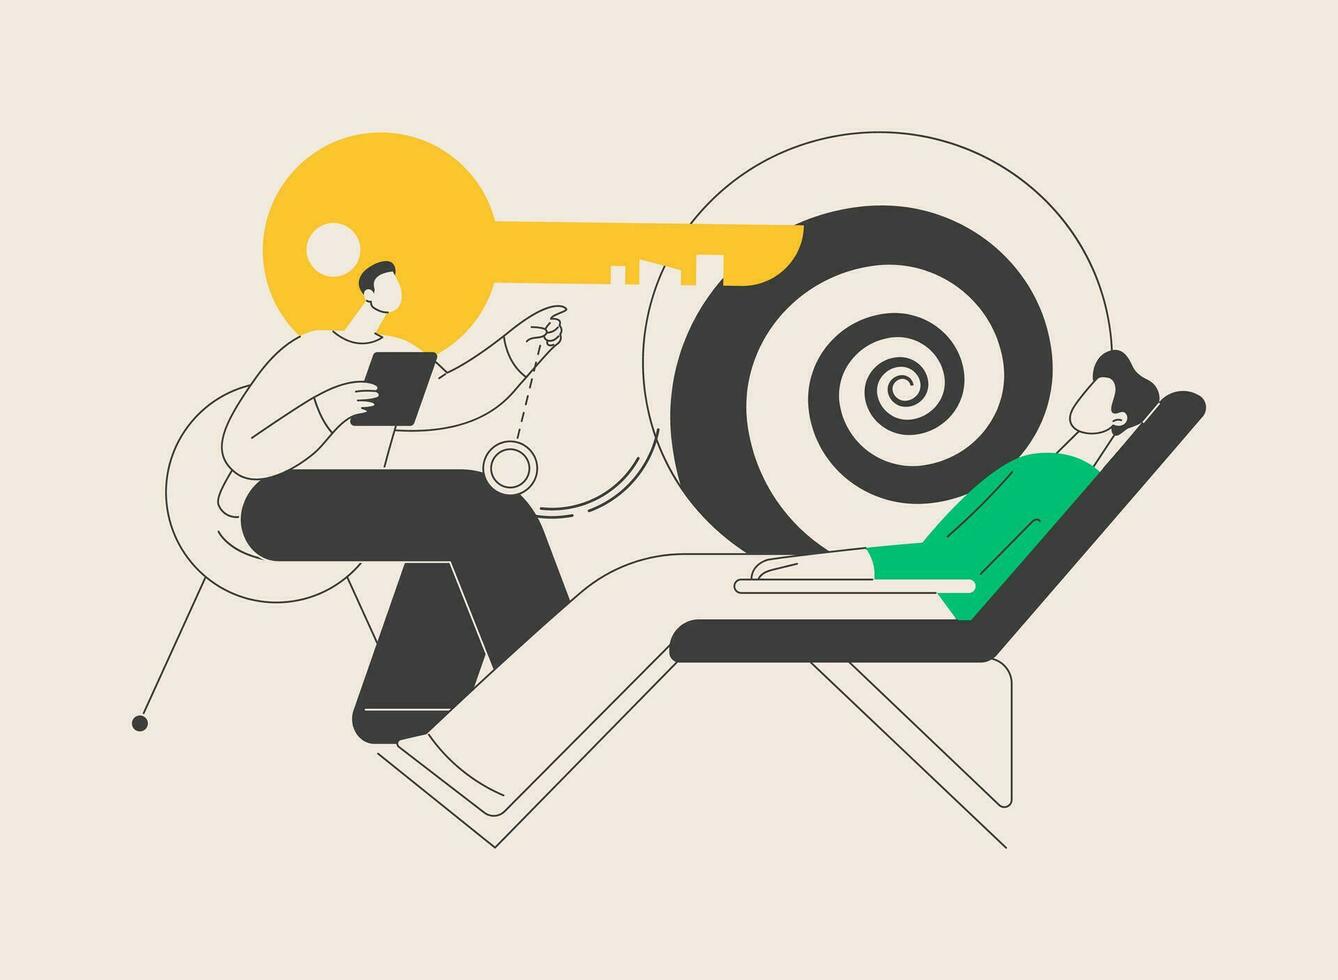 Hypnosis practice abstract concept vector illustration.